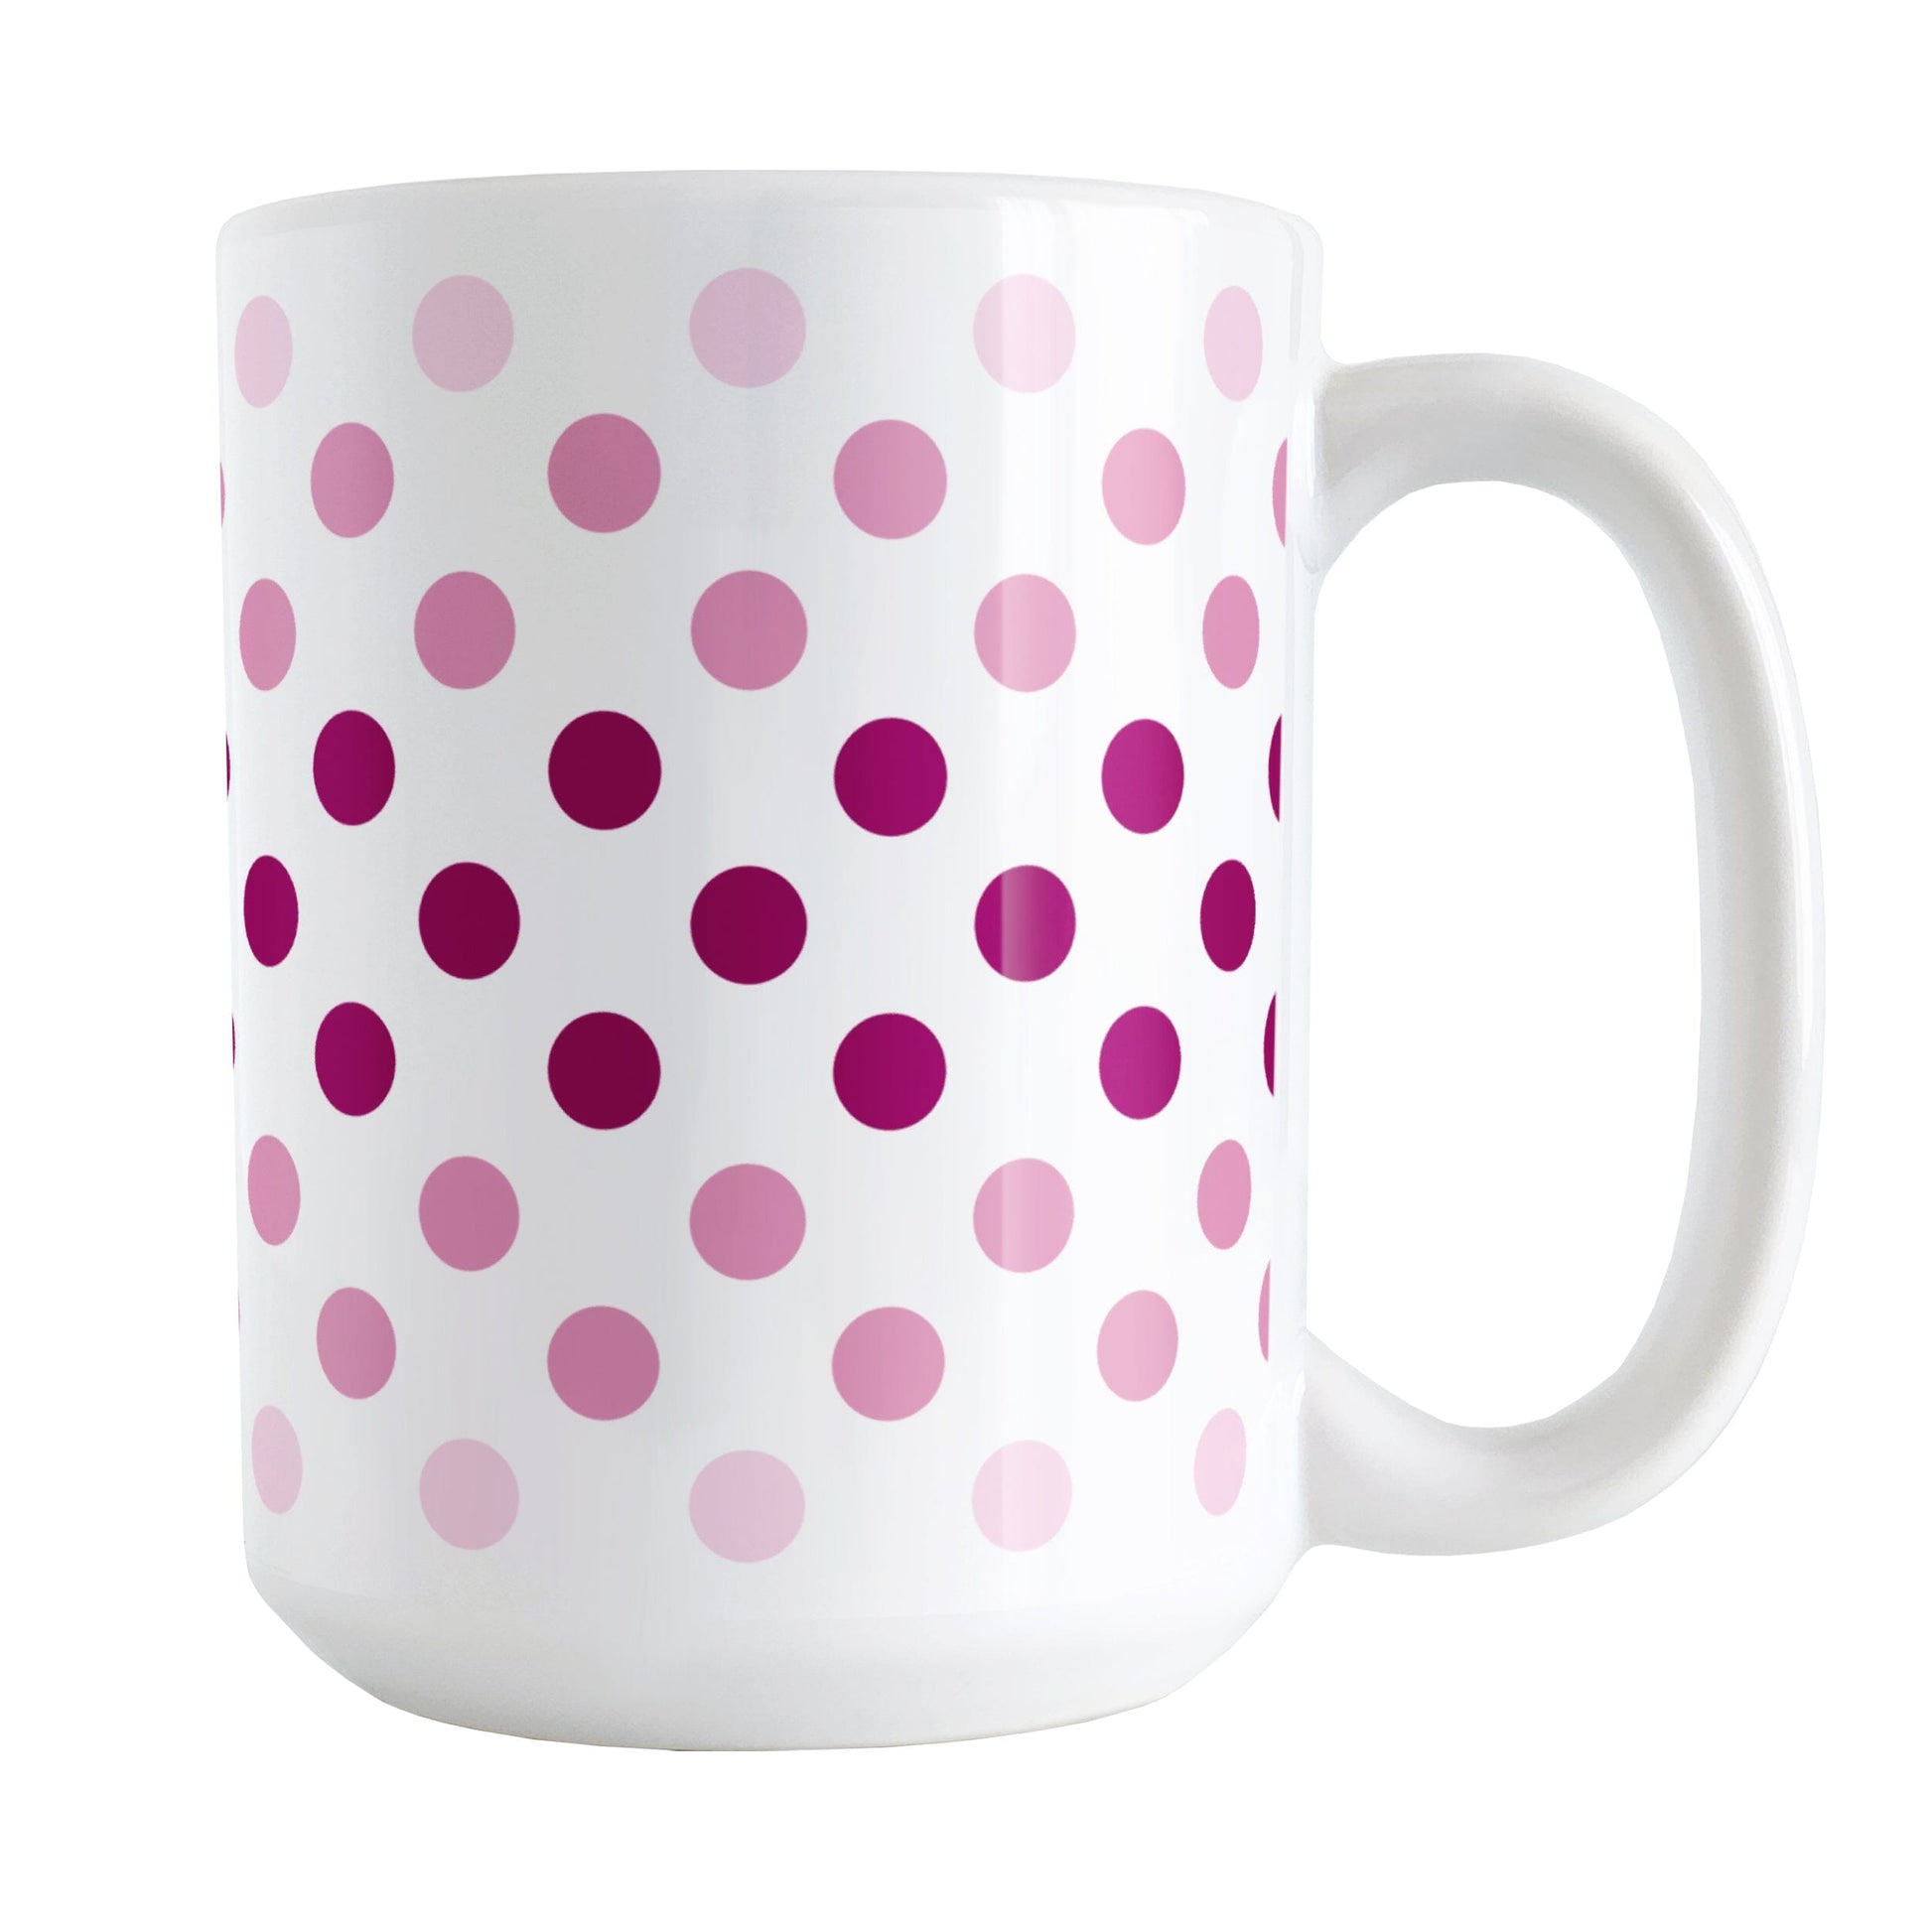 Polka Dots in Pink Mug (15oz) at Amy's Coffee Mugs. A ceramic coffee mug designed with polka dots in different shades of pink, with the darker pink color across the middle and the lighter pink along the top and bottom, in a pattern that wraps around the mug to the handle. 